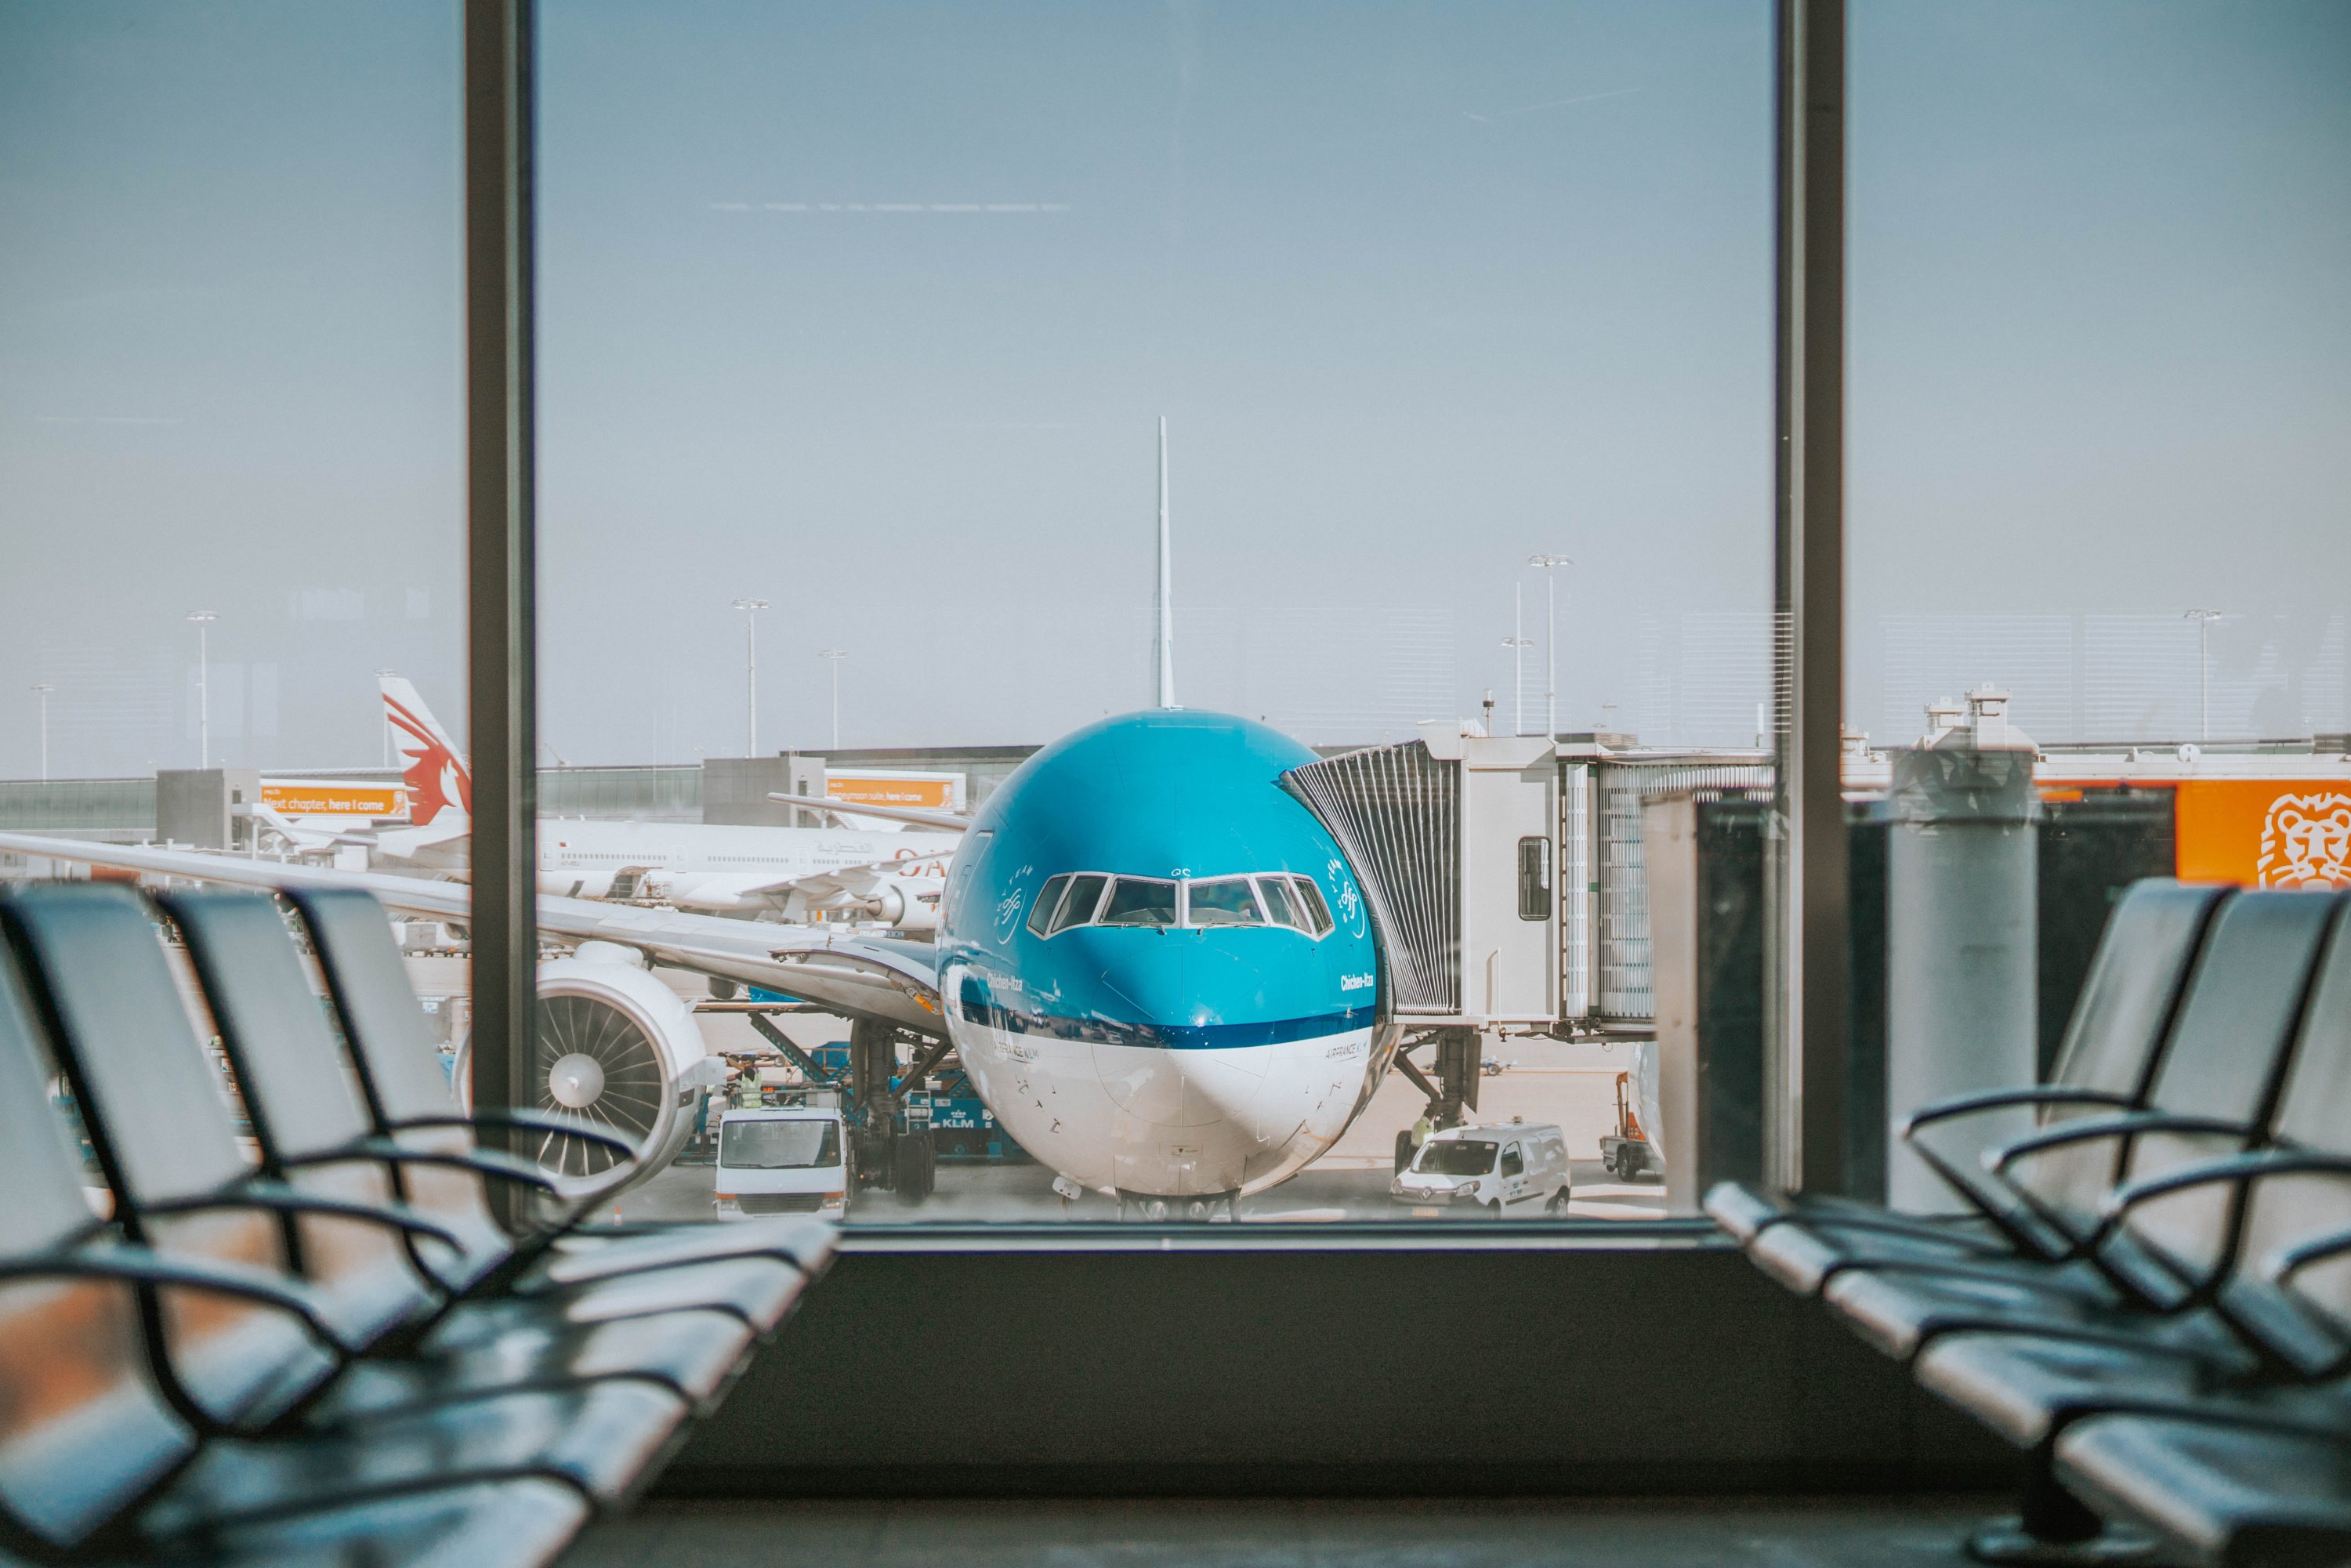 KLM Airplane At an Airport